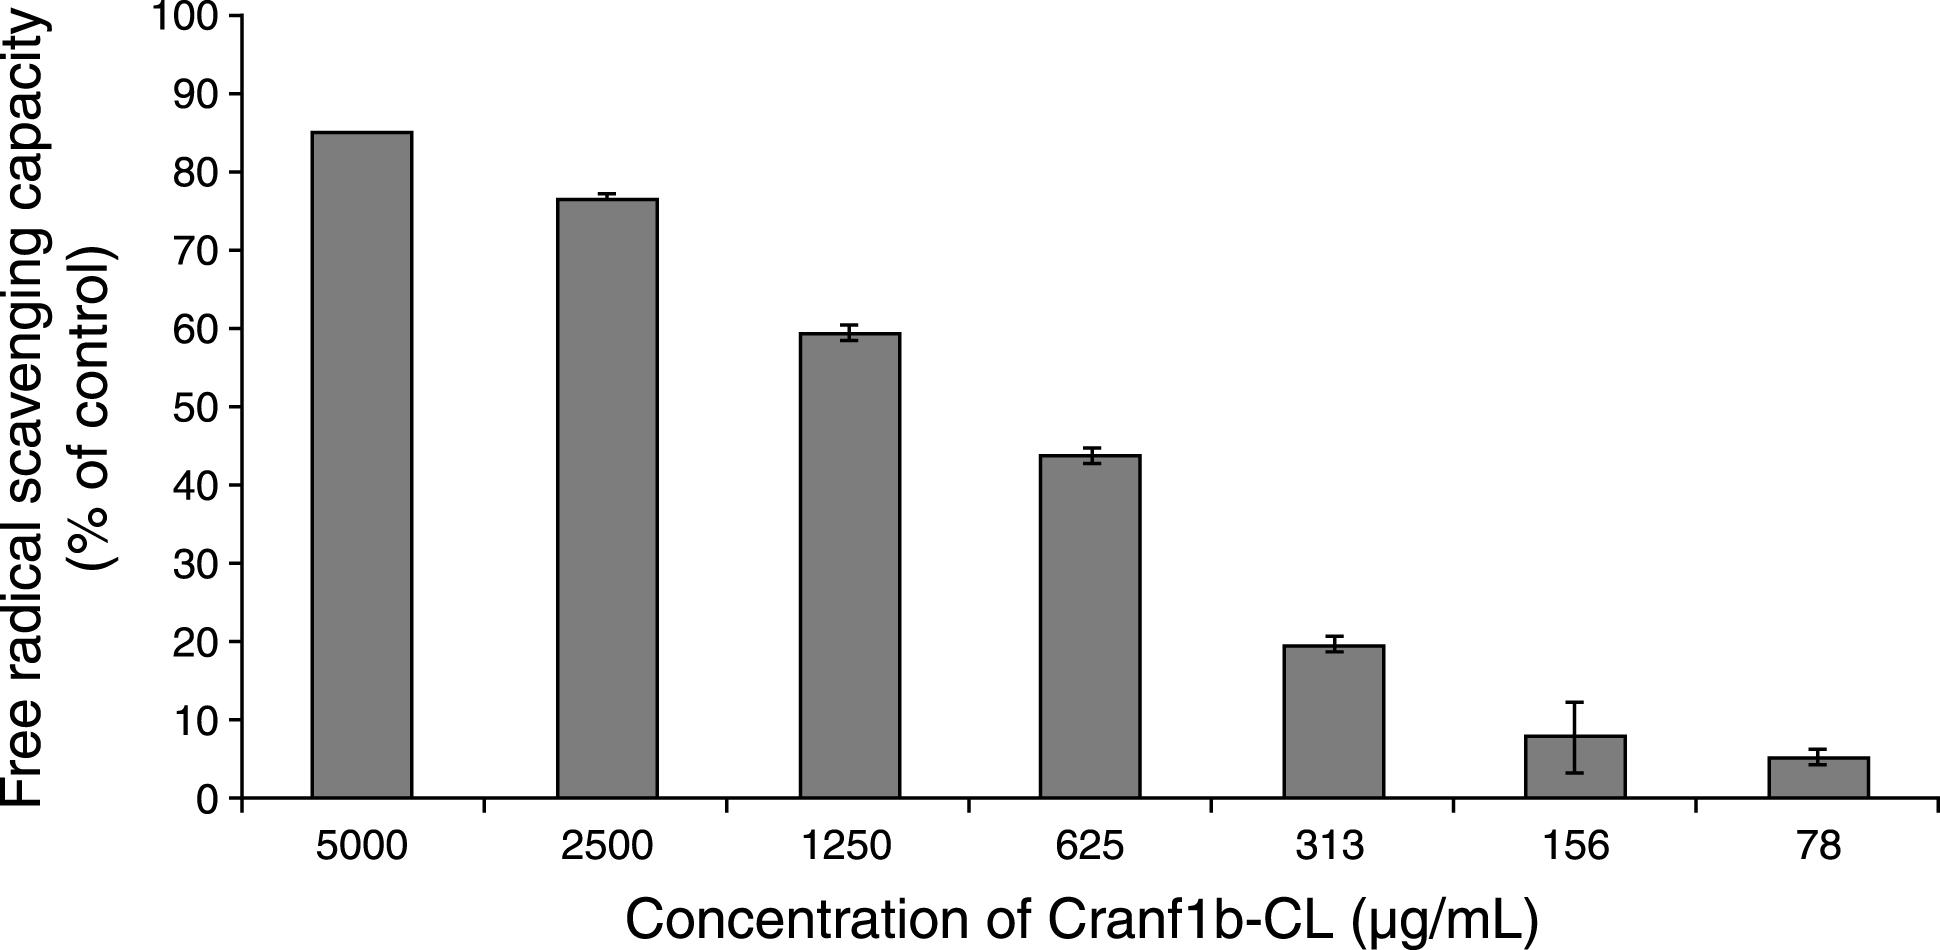 Cranf1b-CL showed free radical scavenging activity in the DPPH assay. Each experiment was conducted in triplicate and all data were expressed in mean±SD (n = 3). BHT (butylated hydroxytoluene) served as the positive control.